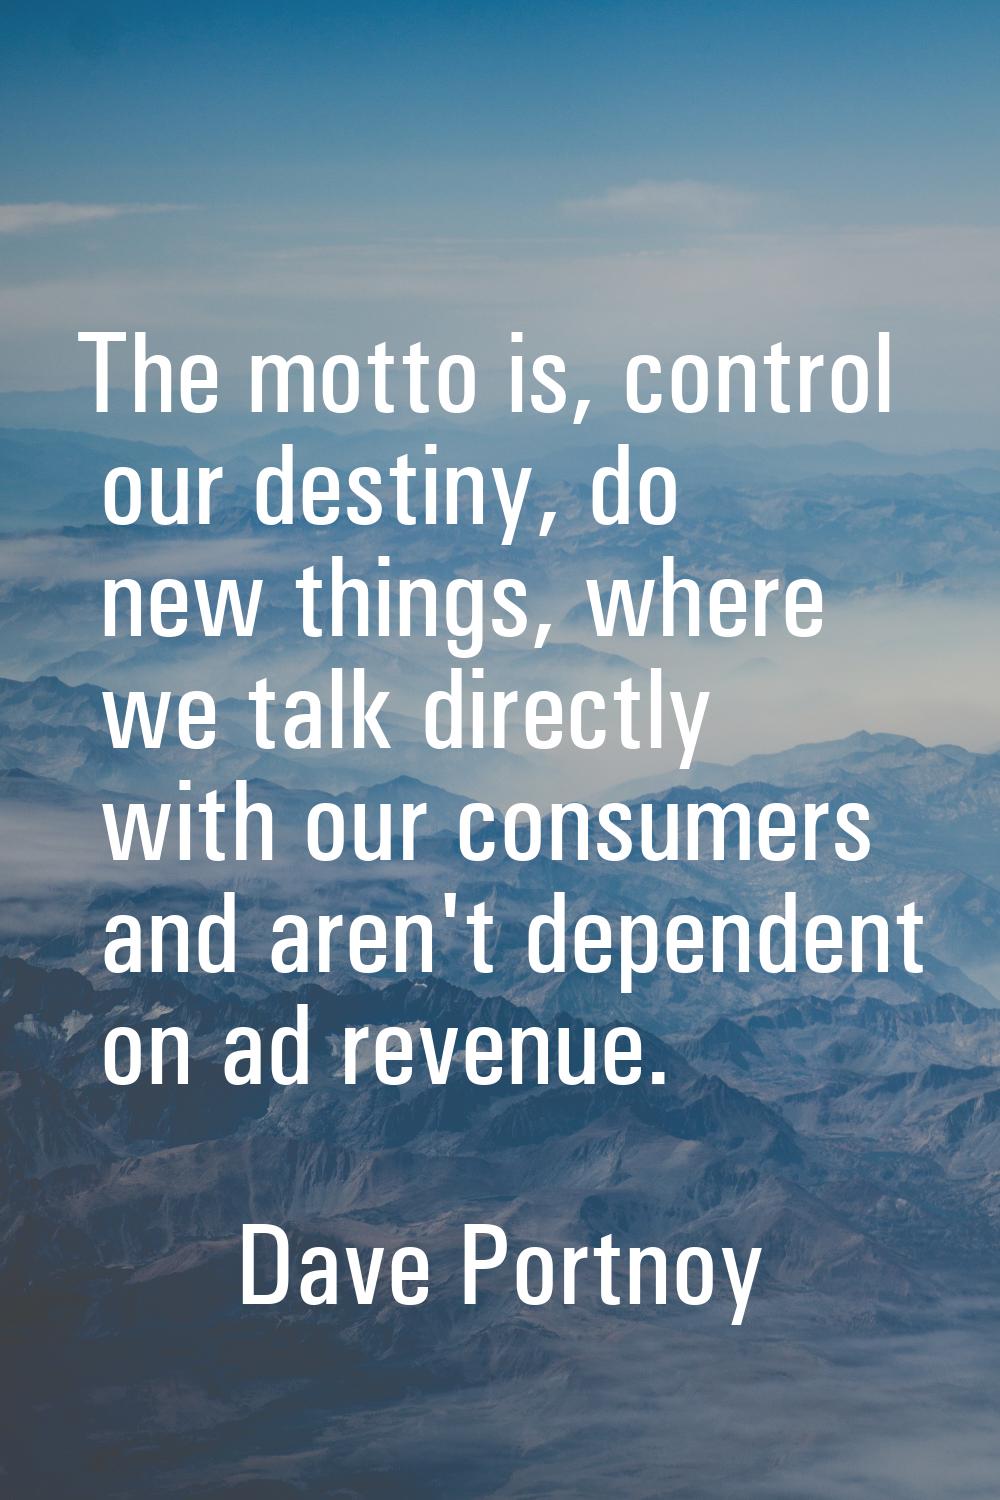 The motto is, control our destiny, do new things, where we talk directly with our consumers and are